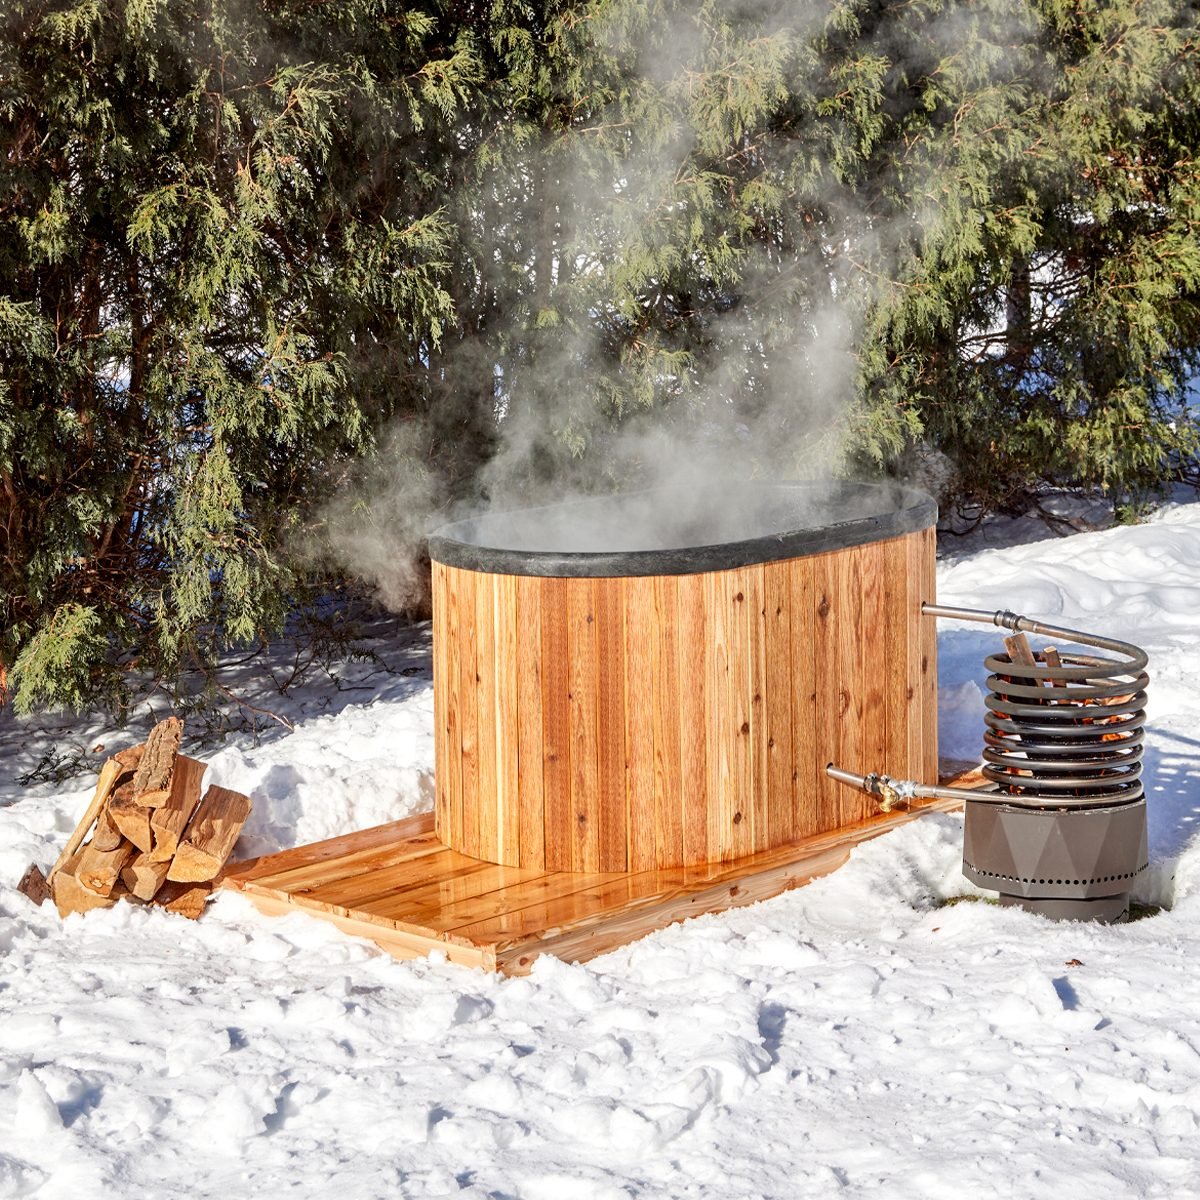 How to Build a DIY Hot Tub